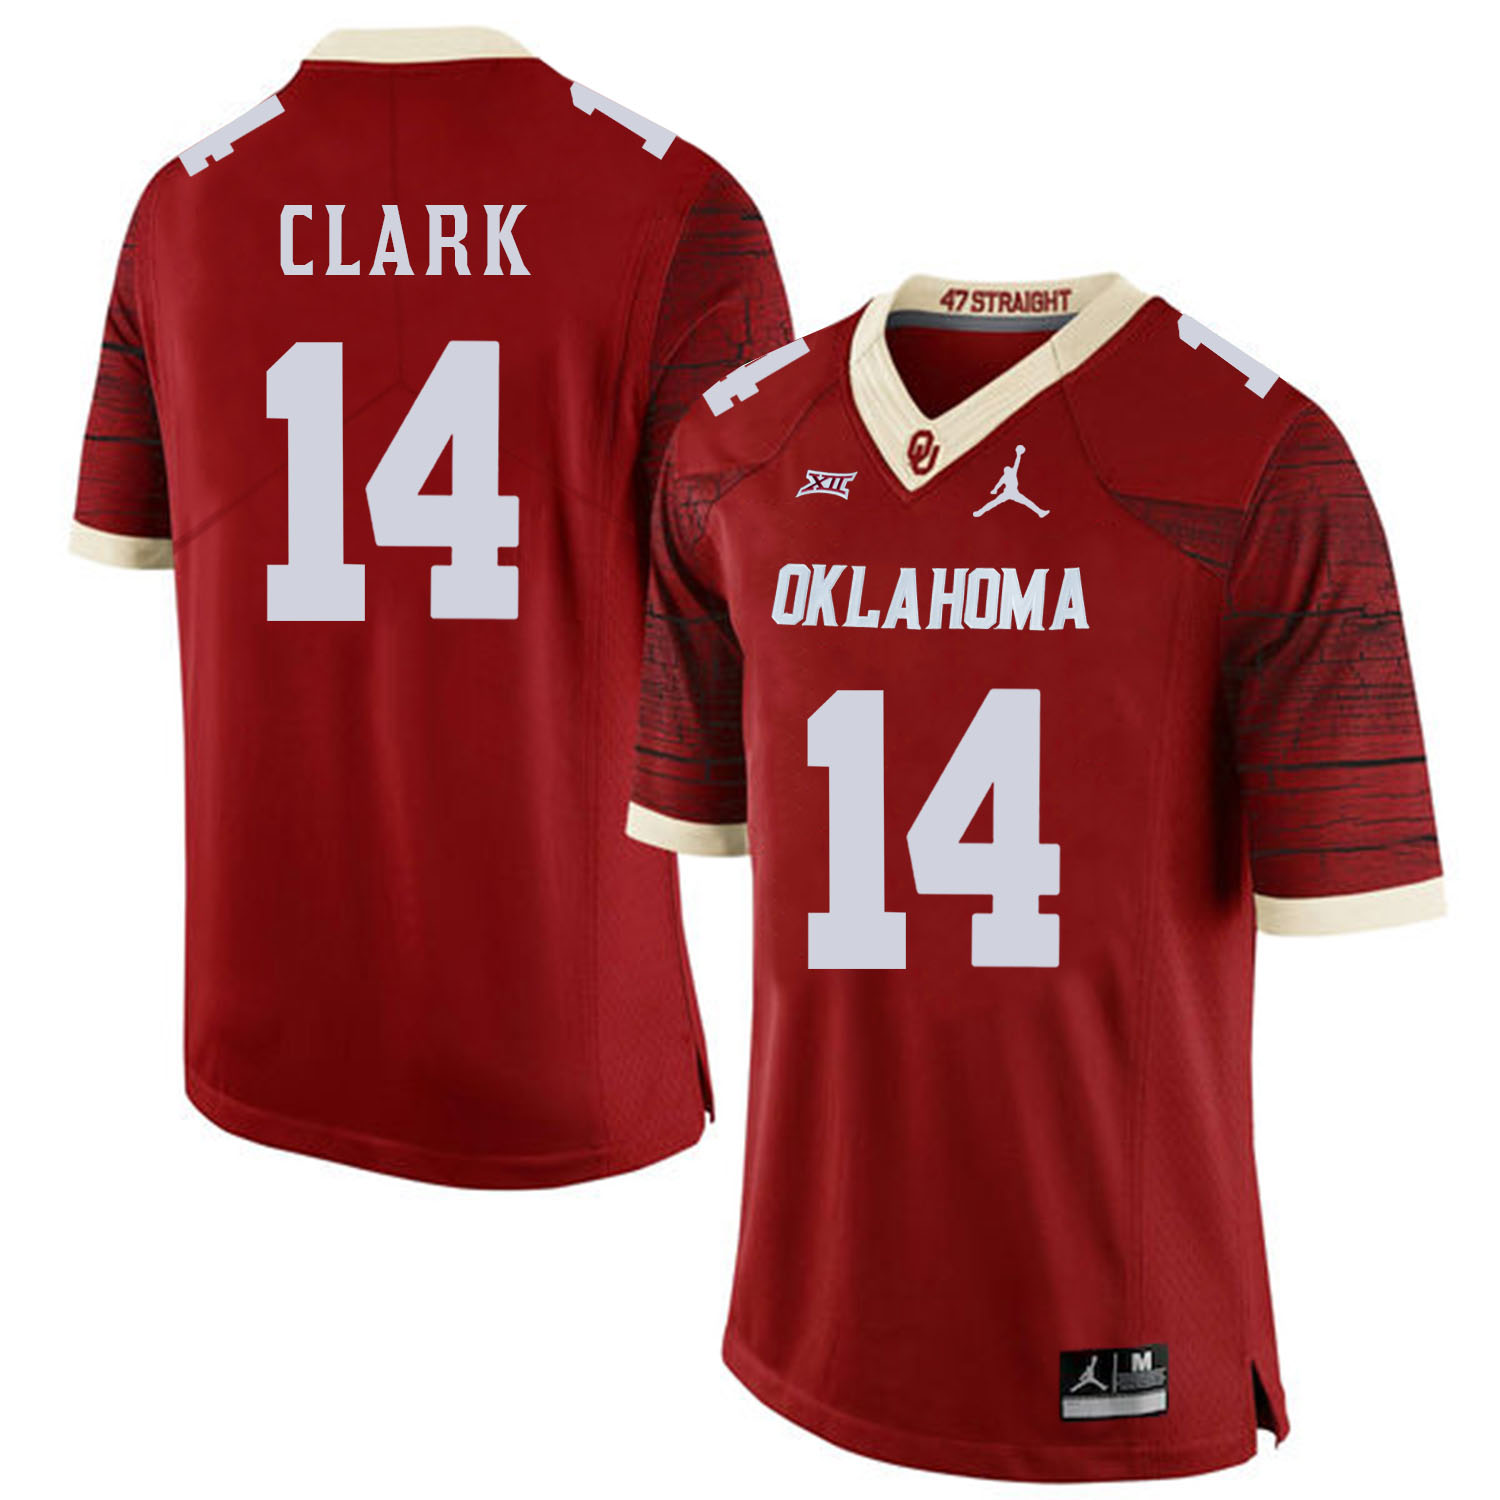 Oklahoma Sooners 14 Reece Clark Red 47 Game Winning Streak College Football Jersey - Click Image to Close